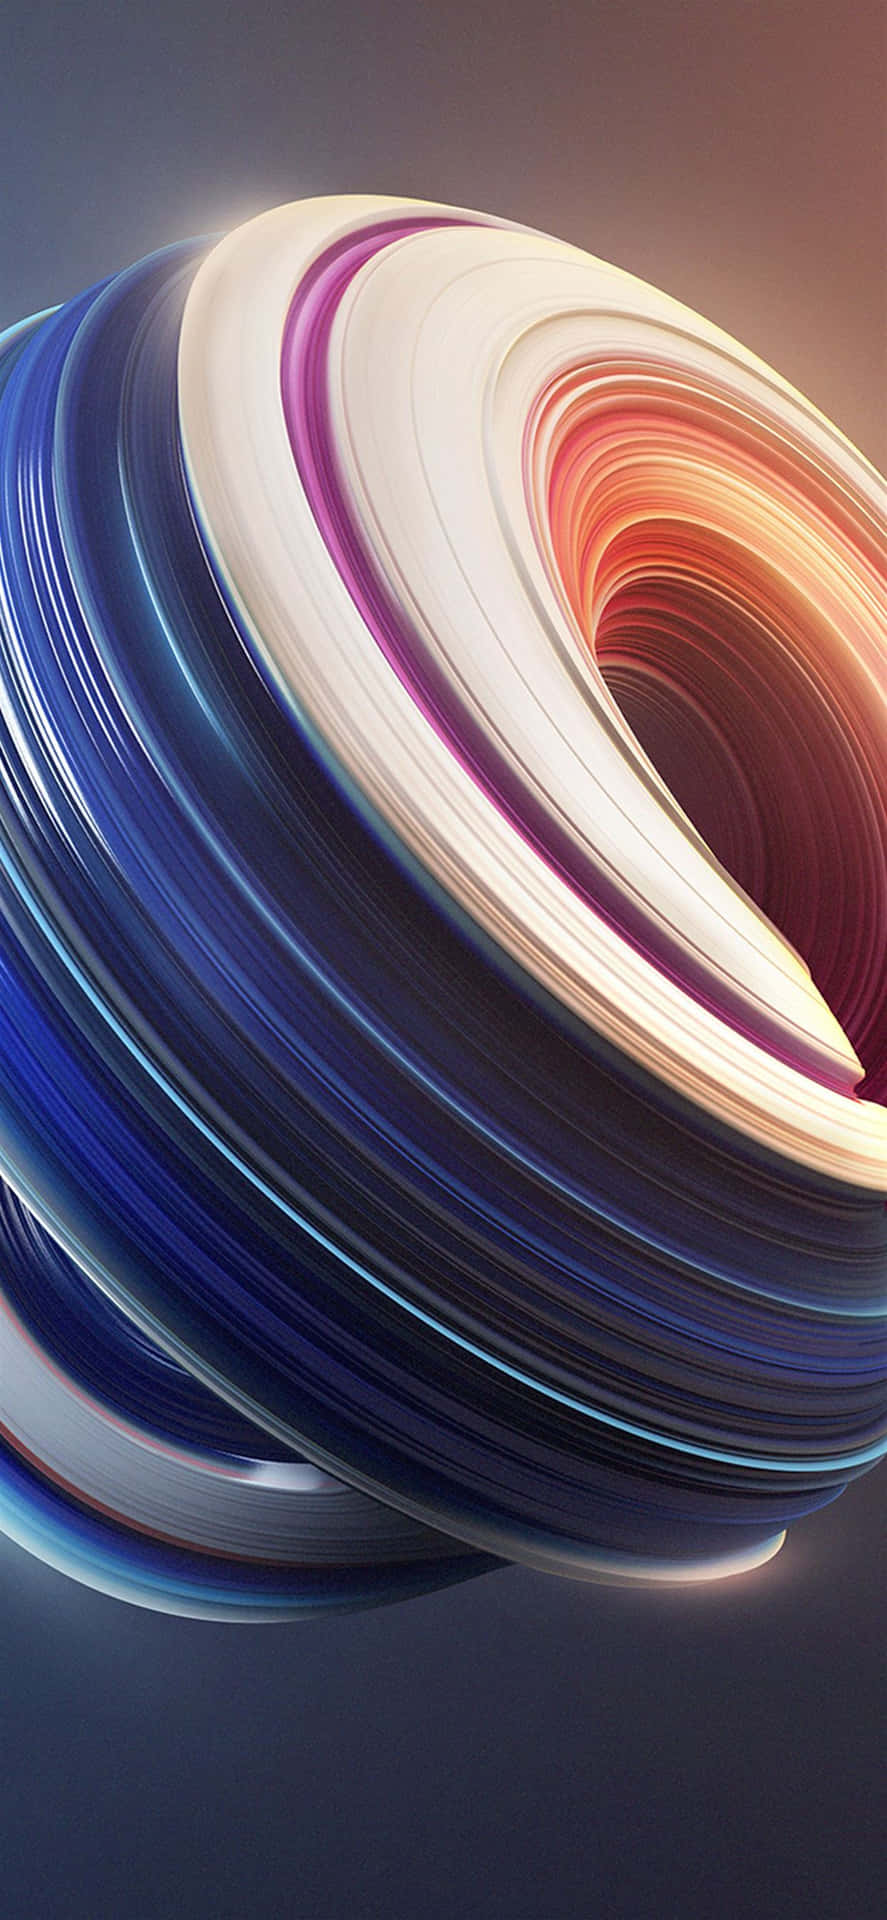 Red And Blue Spiral For Iphone Wallpaper